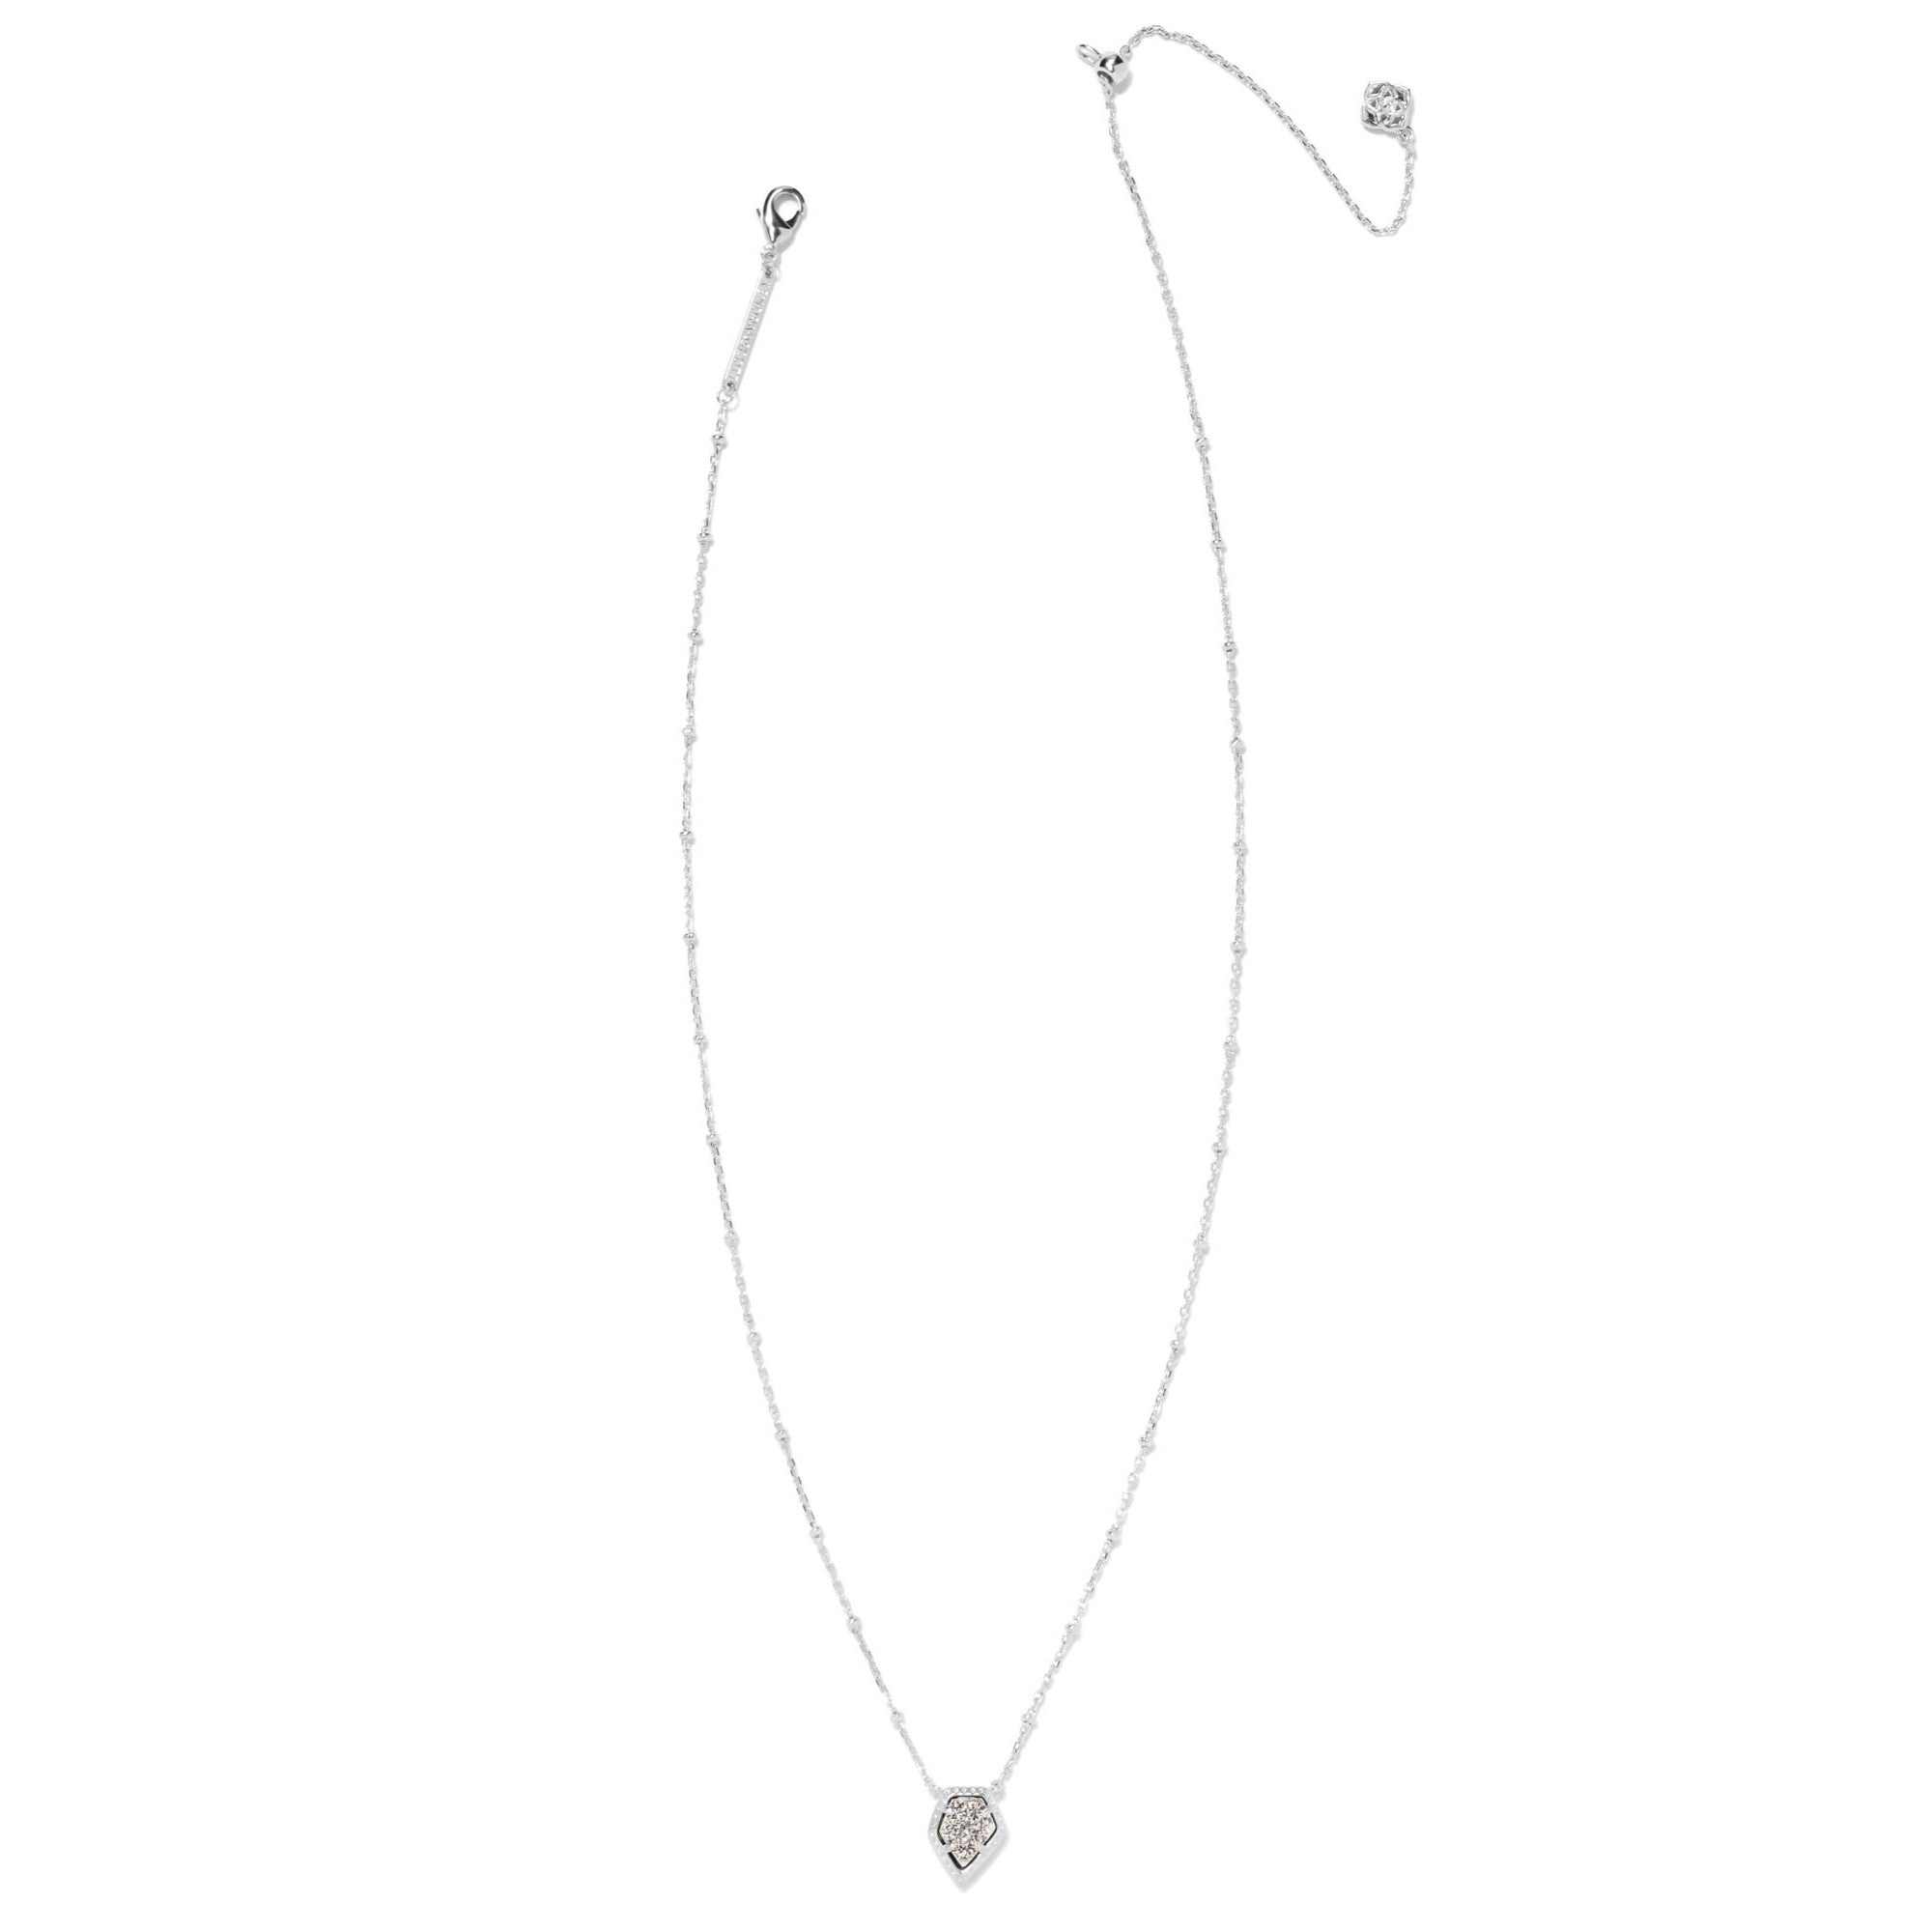 Kendra Scott | Framed Tess Silver Satellite Short Pendant Necklace in Platinum Drusy - Giddy Up Glamour Boutique